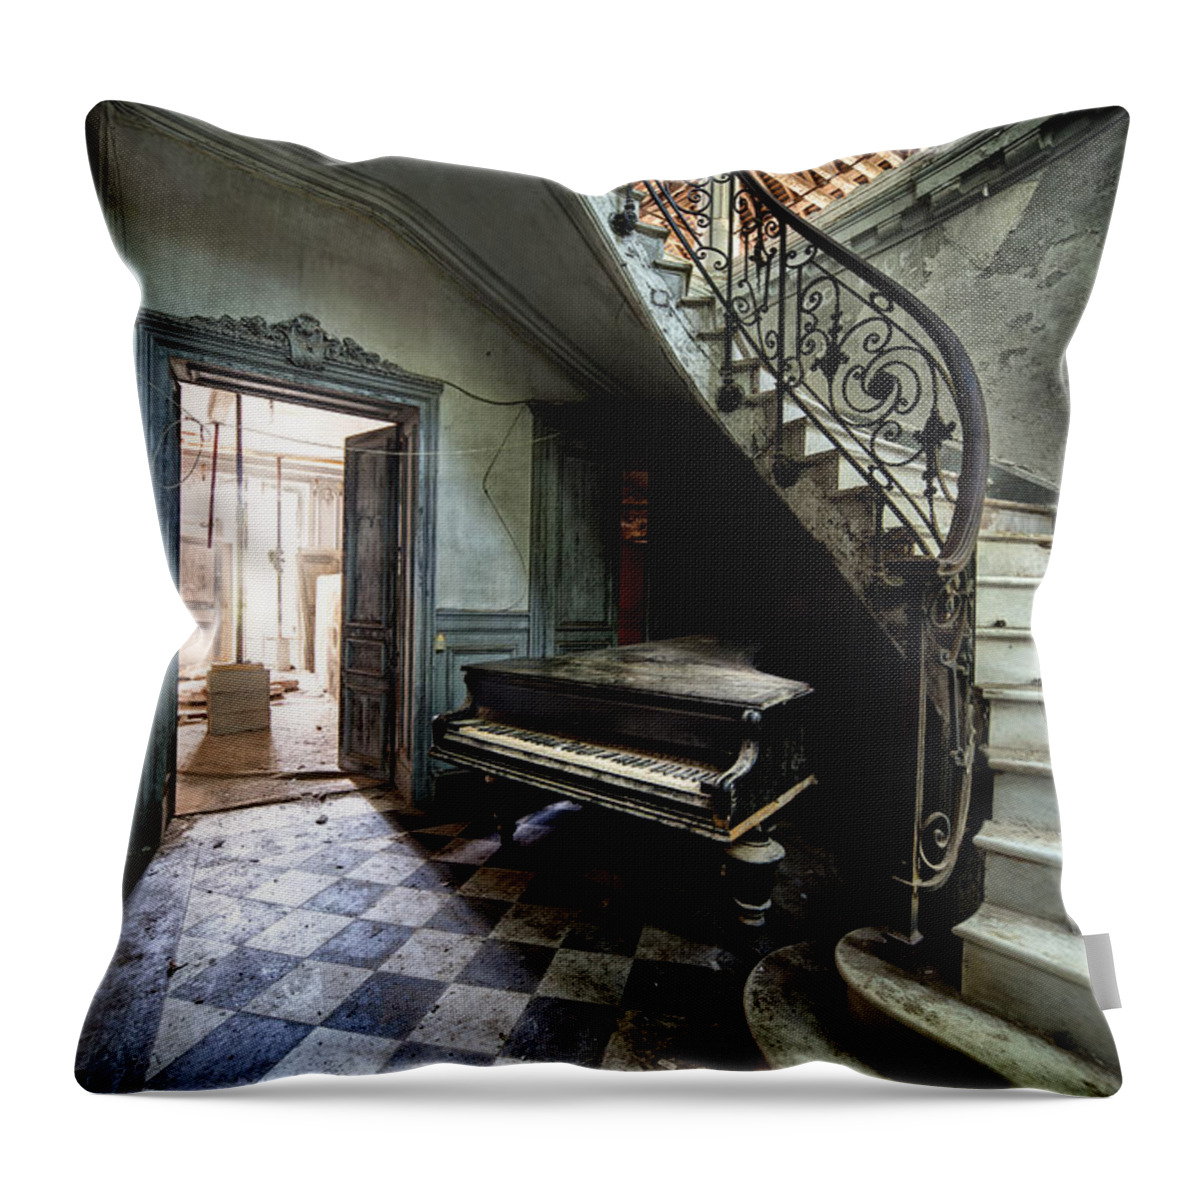 Abandoned Throw Pillow featuring the photograph Forgotten Ancient Piano - Urban Exploration by Dirk Ercken